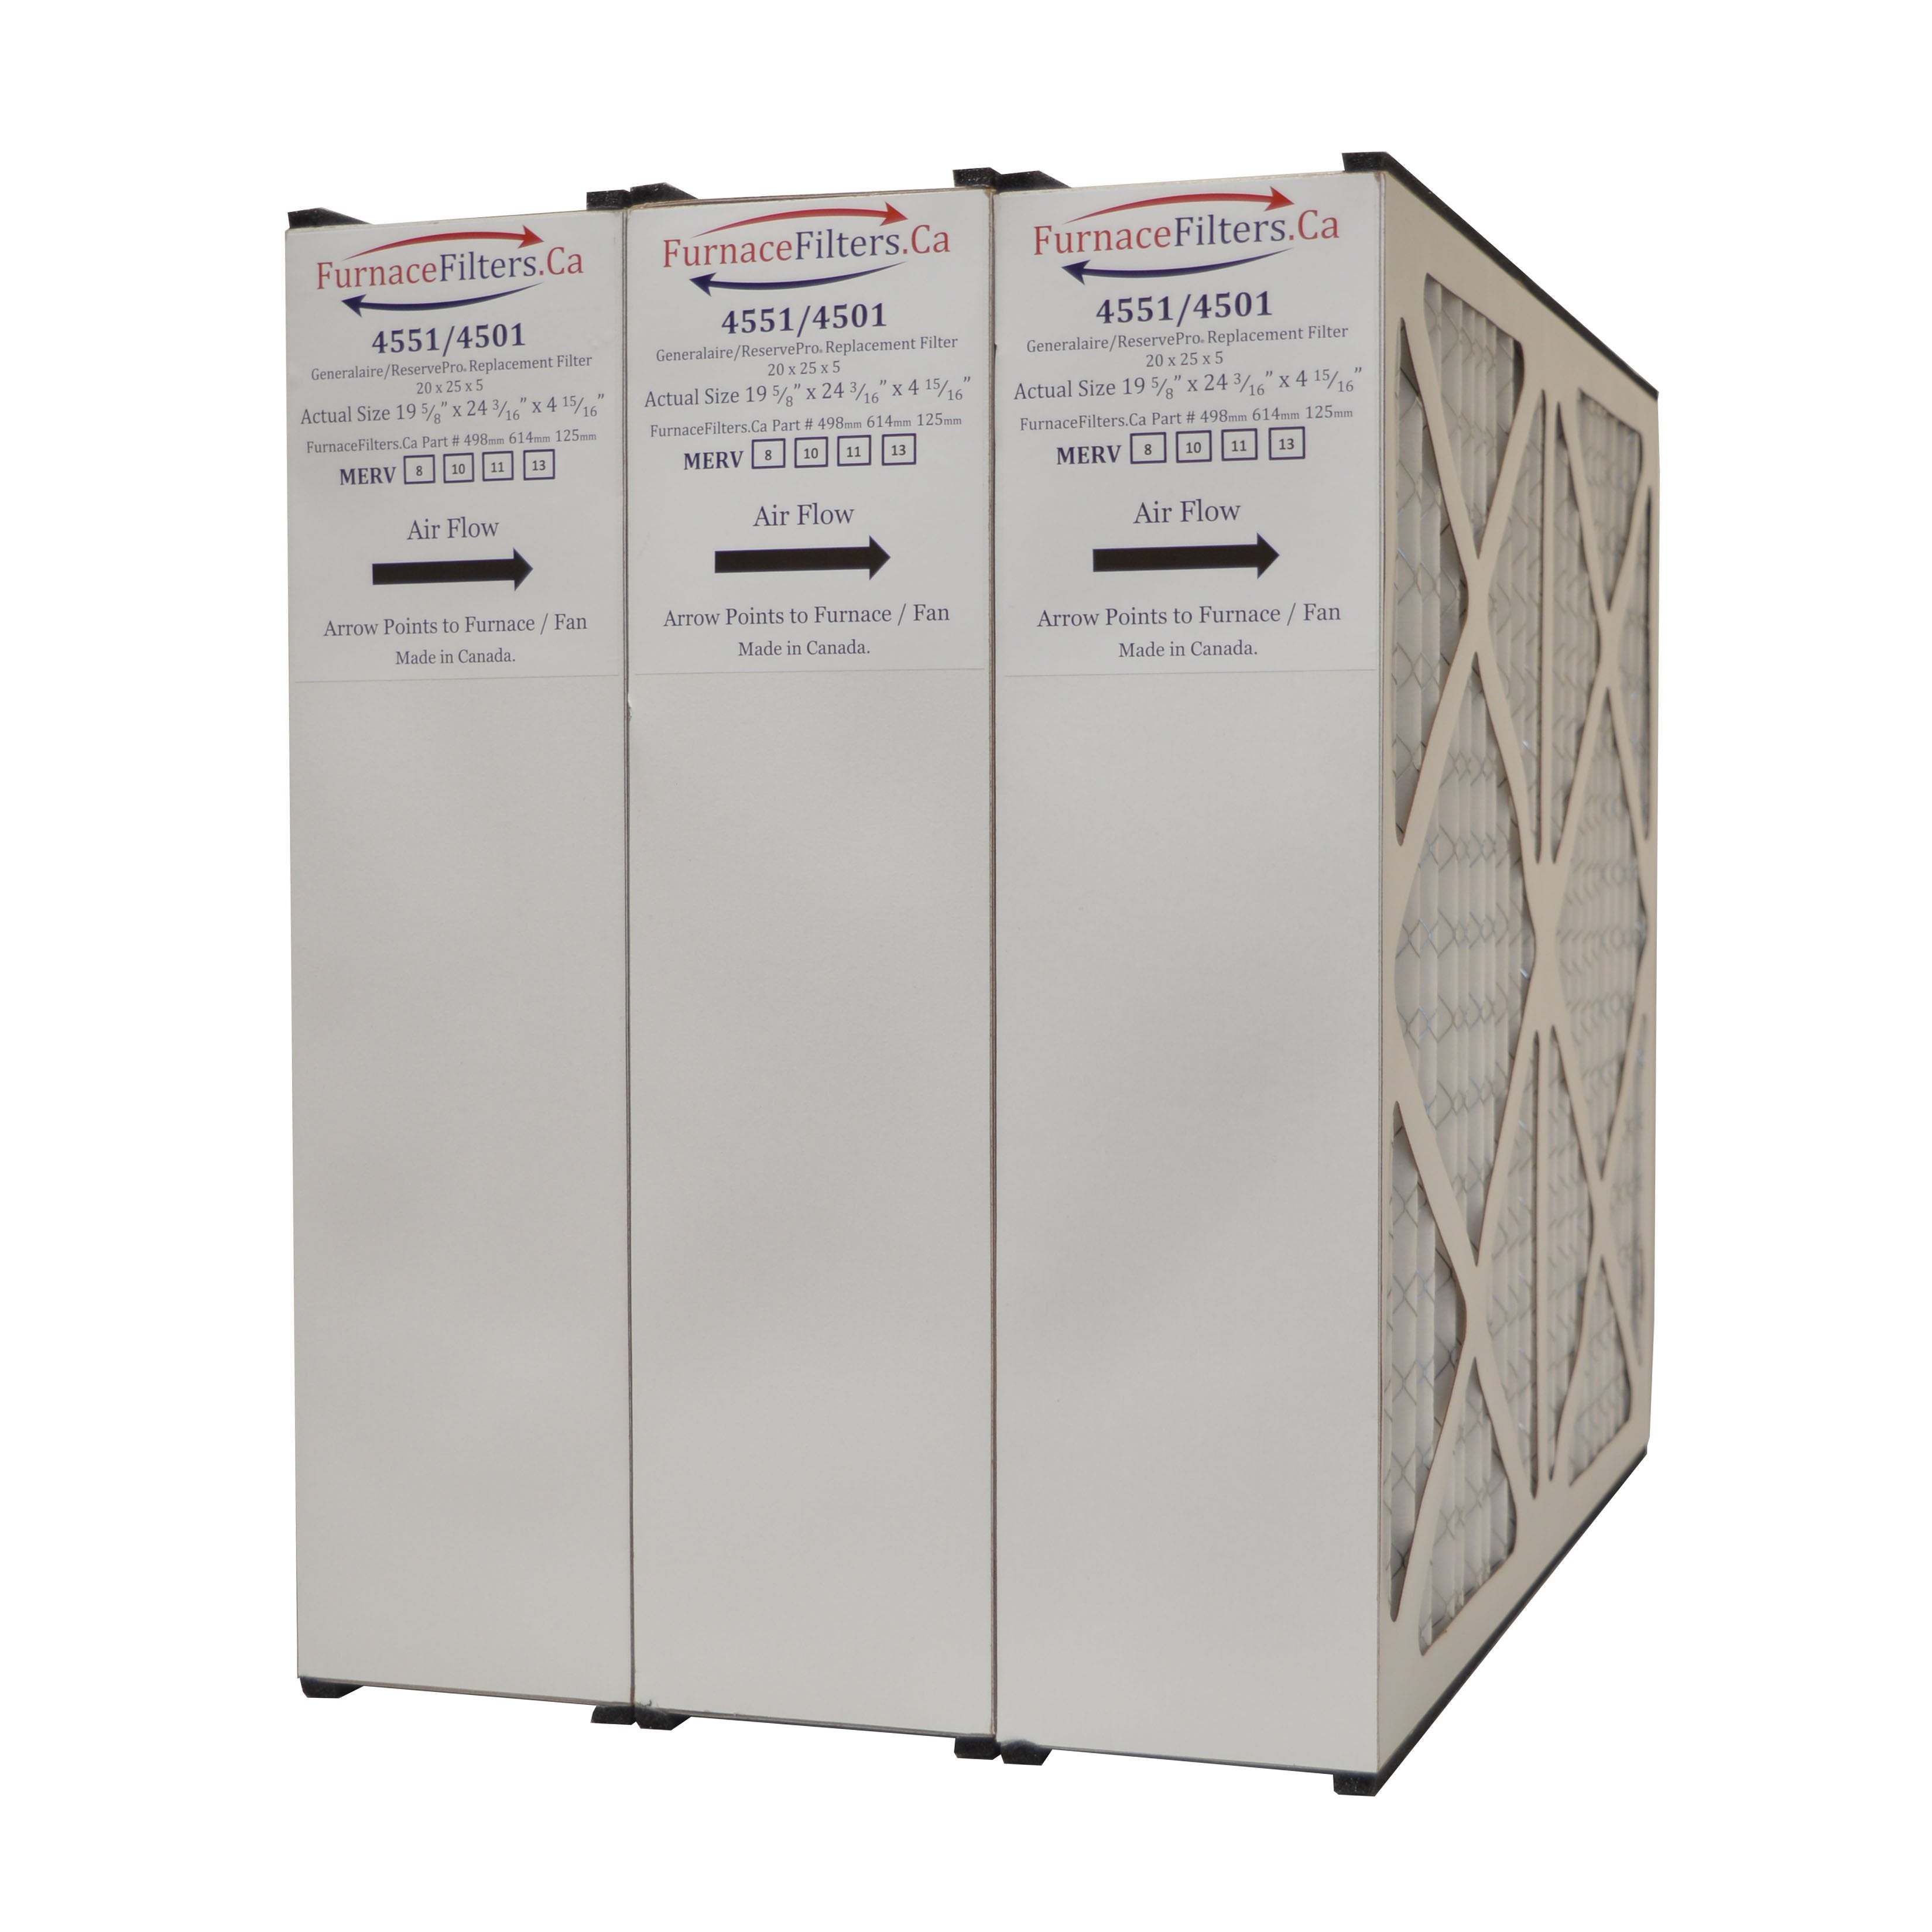 Generalaire 4501 Furnace Filter MERV 10 GF 4551 Mac 2000 Replacement 20x25x5. Case of 3 Made in Canada by Furnace Filters.Ca